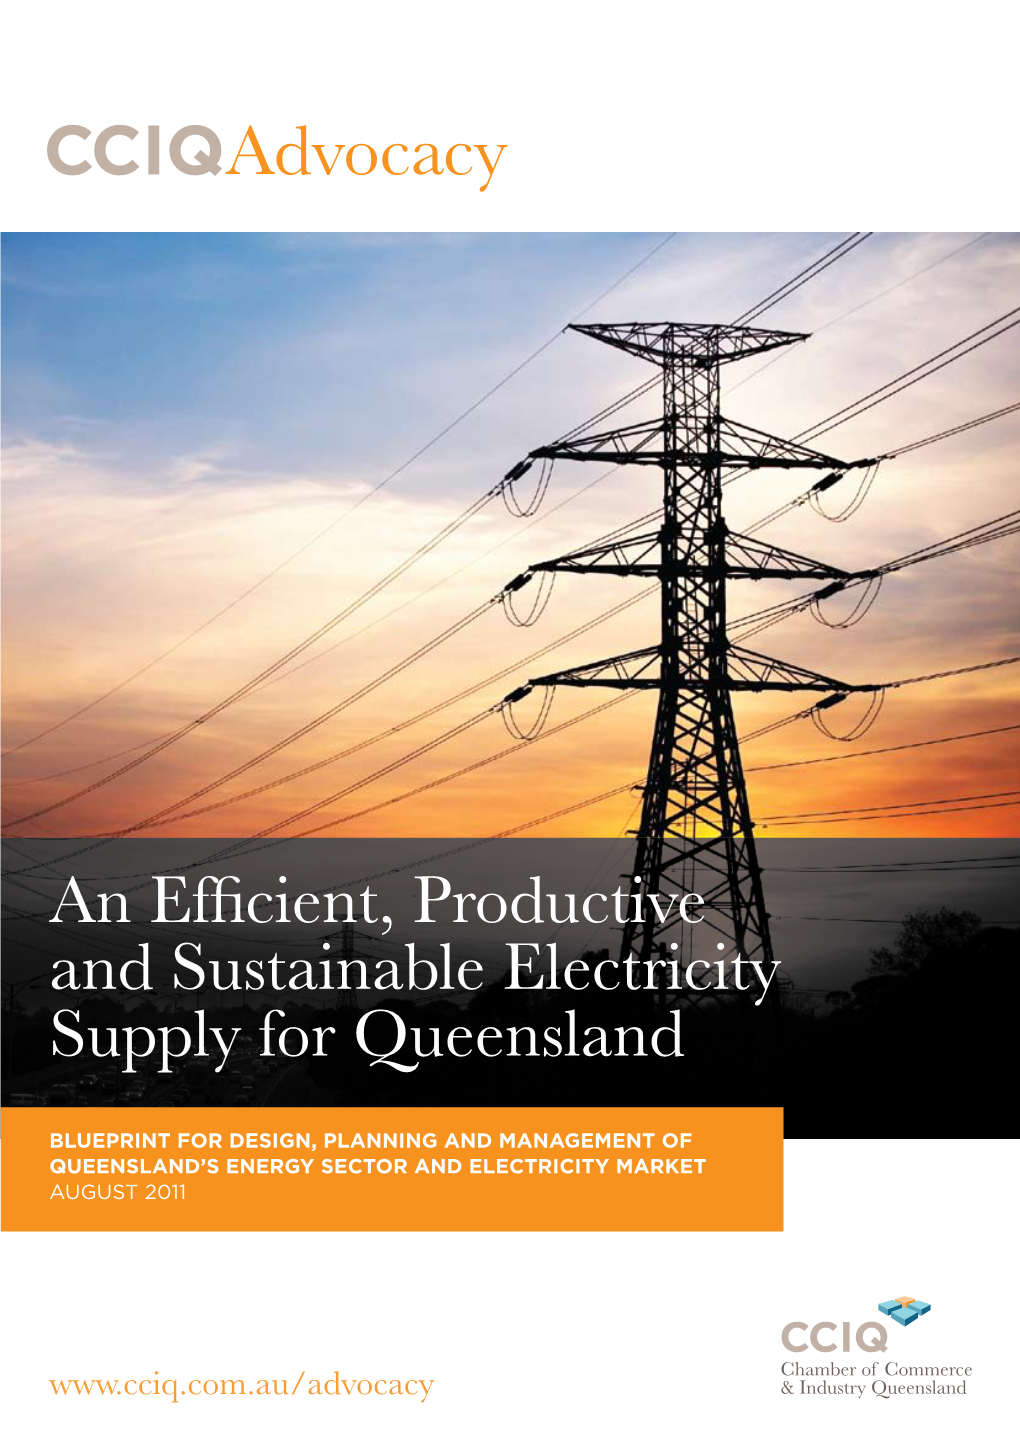 An Efficient, Productive and Sustainable Electricity Supply for Queensland